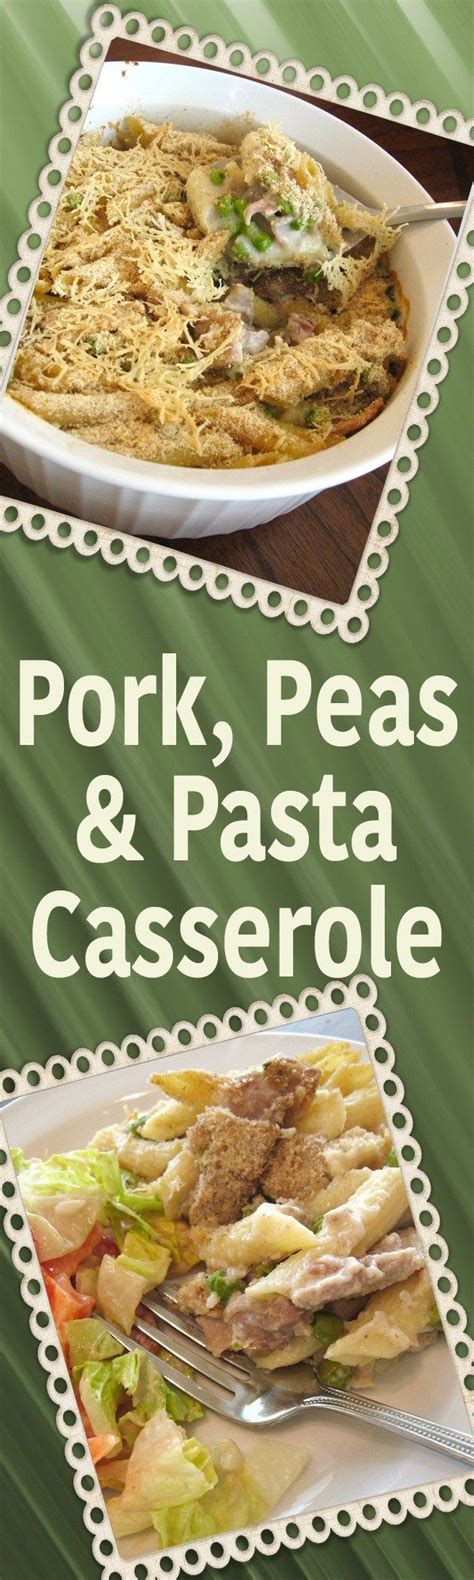 5 cast iron recipes are great for leftovers. Pork, Peas & Pasta Casserole | Leftover pork recipes, Pork ...